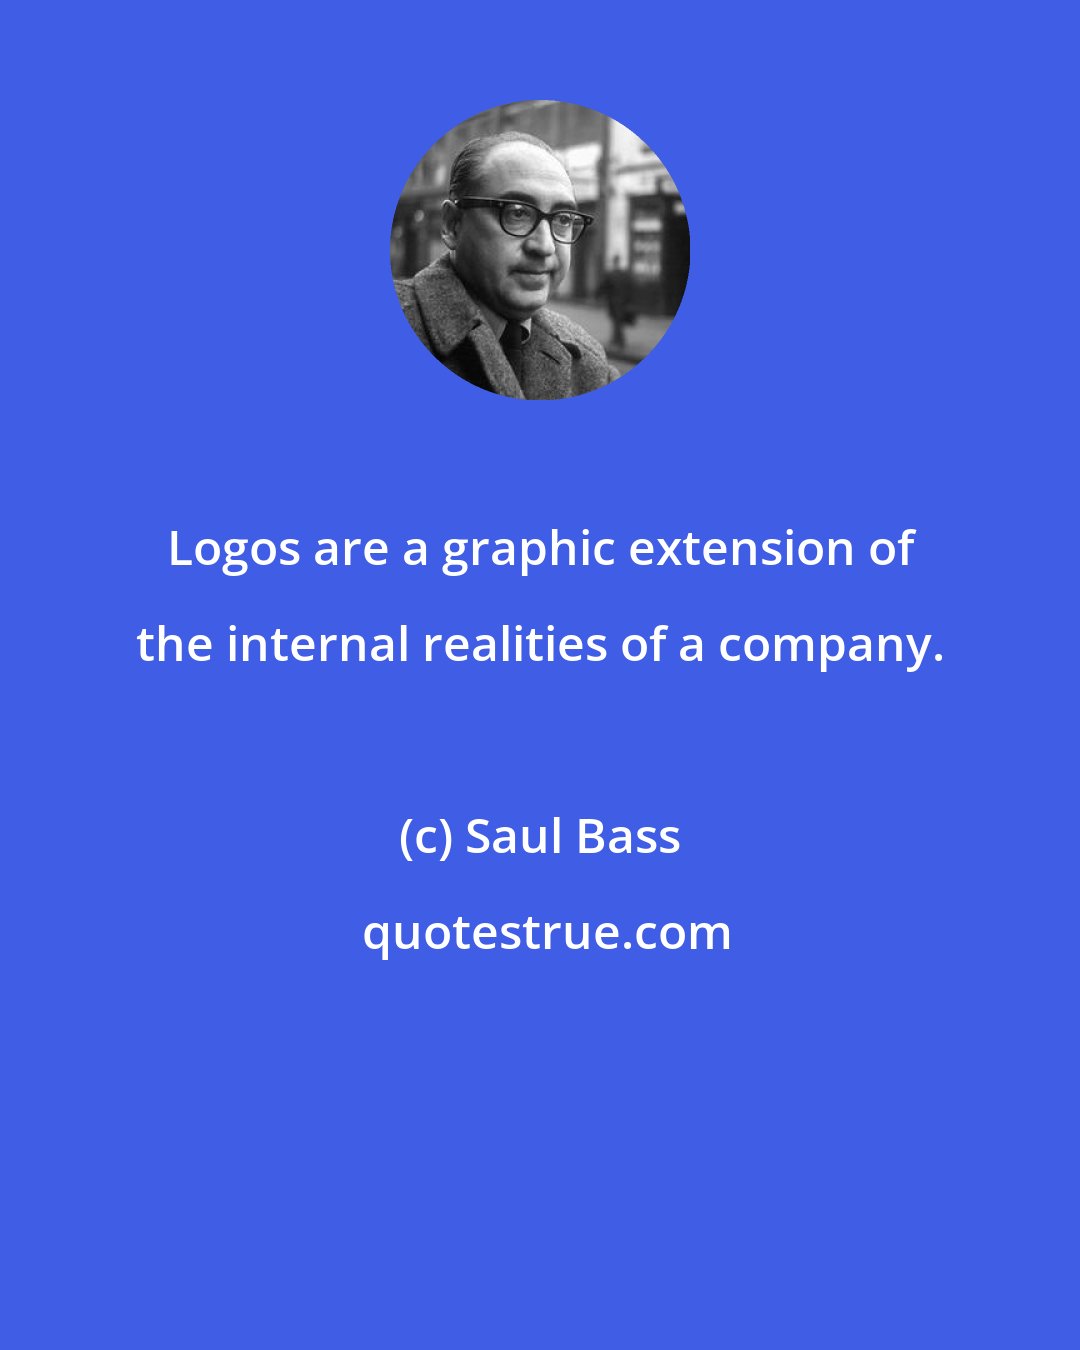 Saul Bass: Logos are a graphic extension of the internal realities of a company.